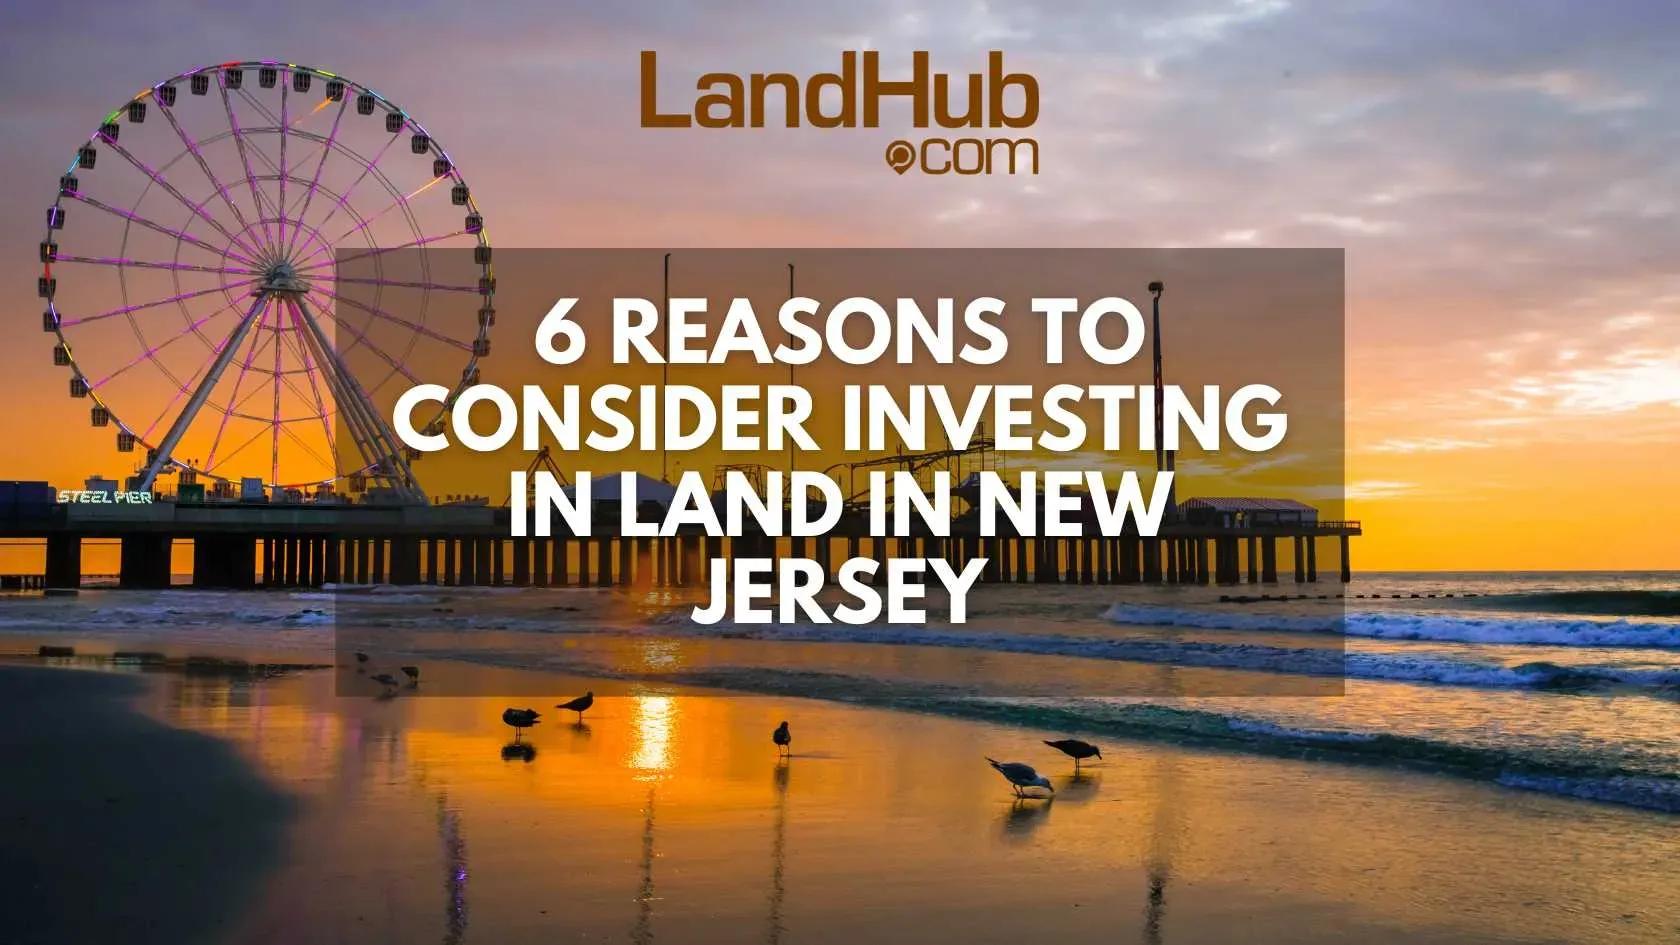 6 reasons to consider investing in land in new jersey